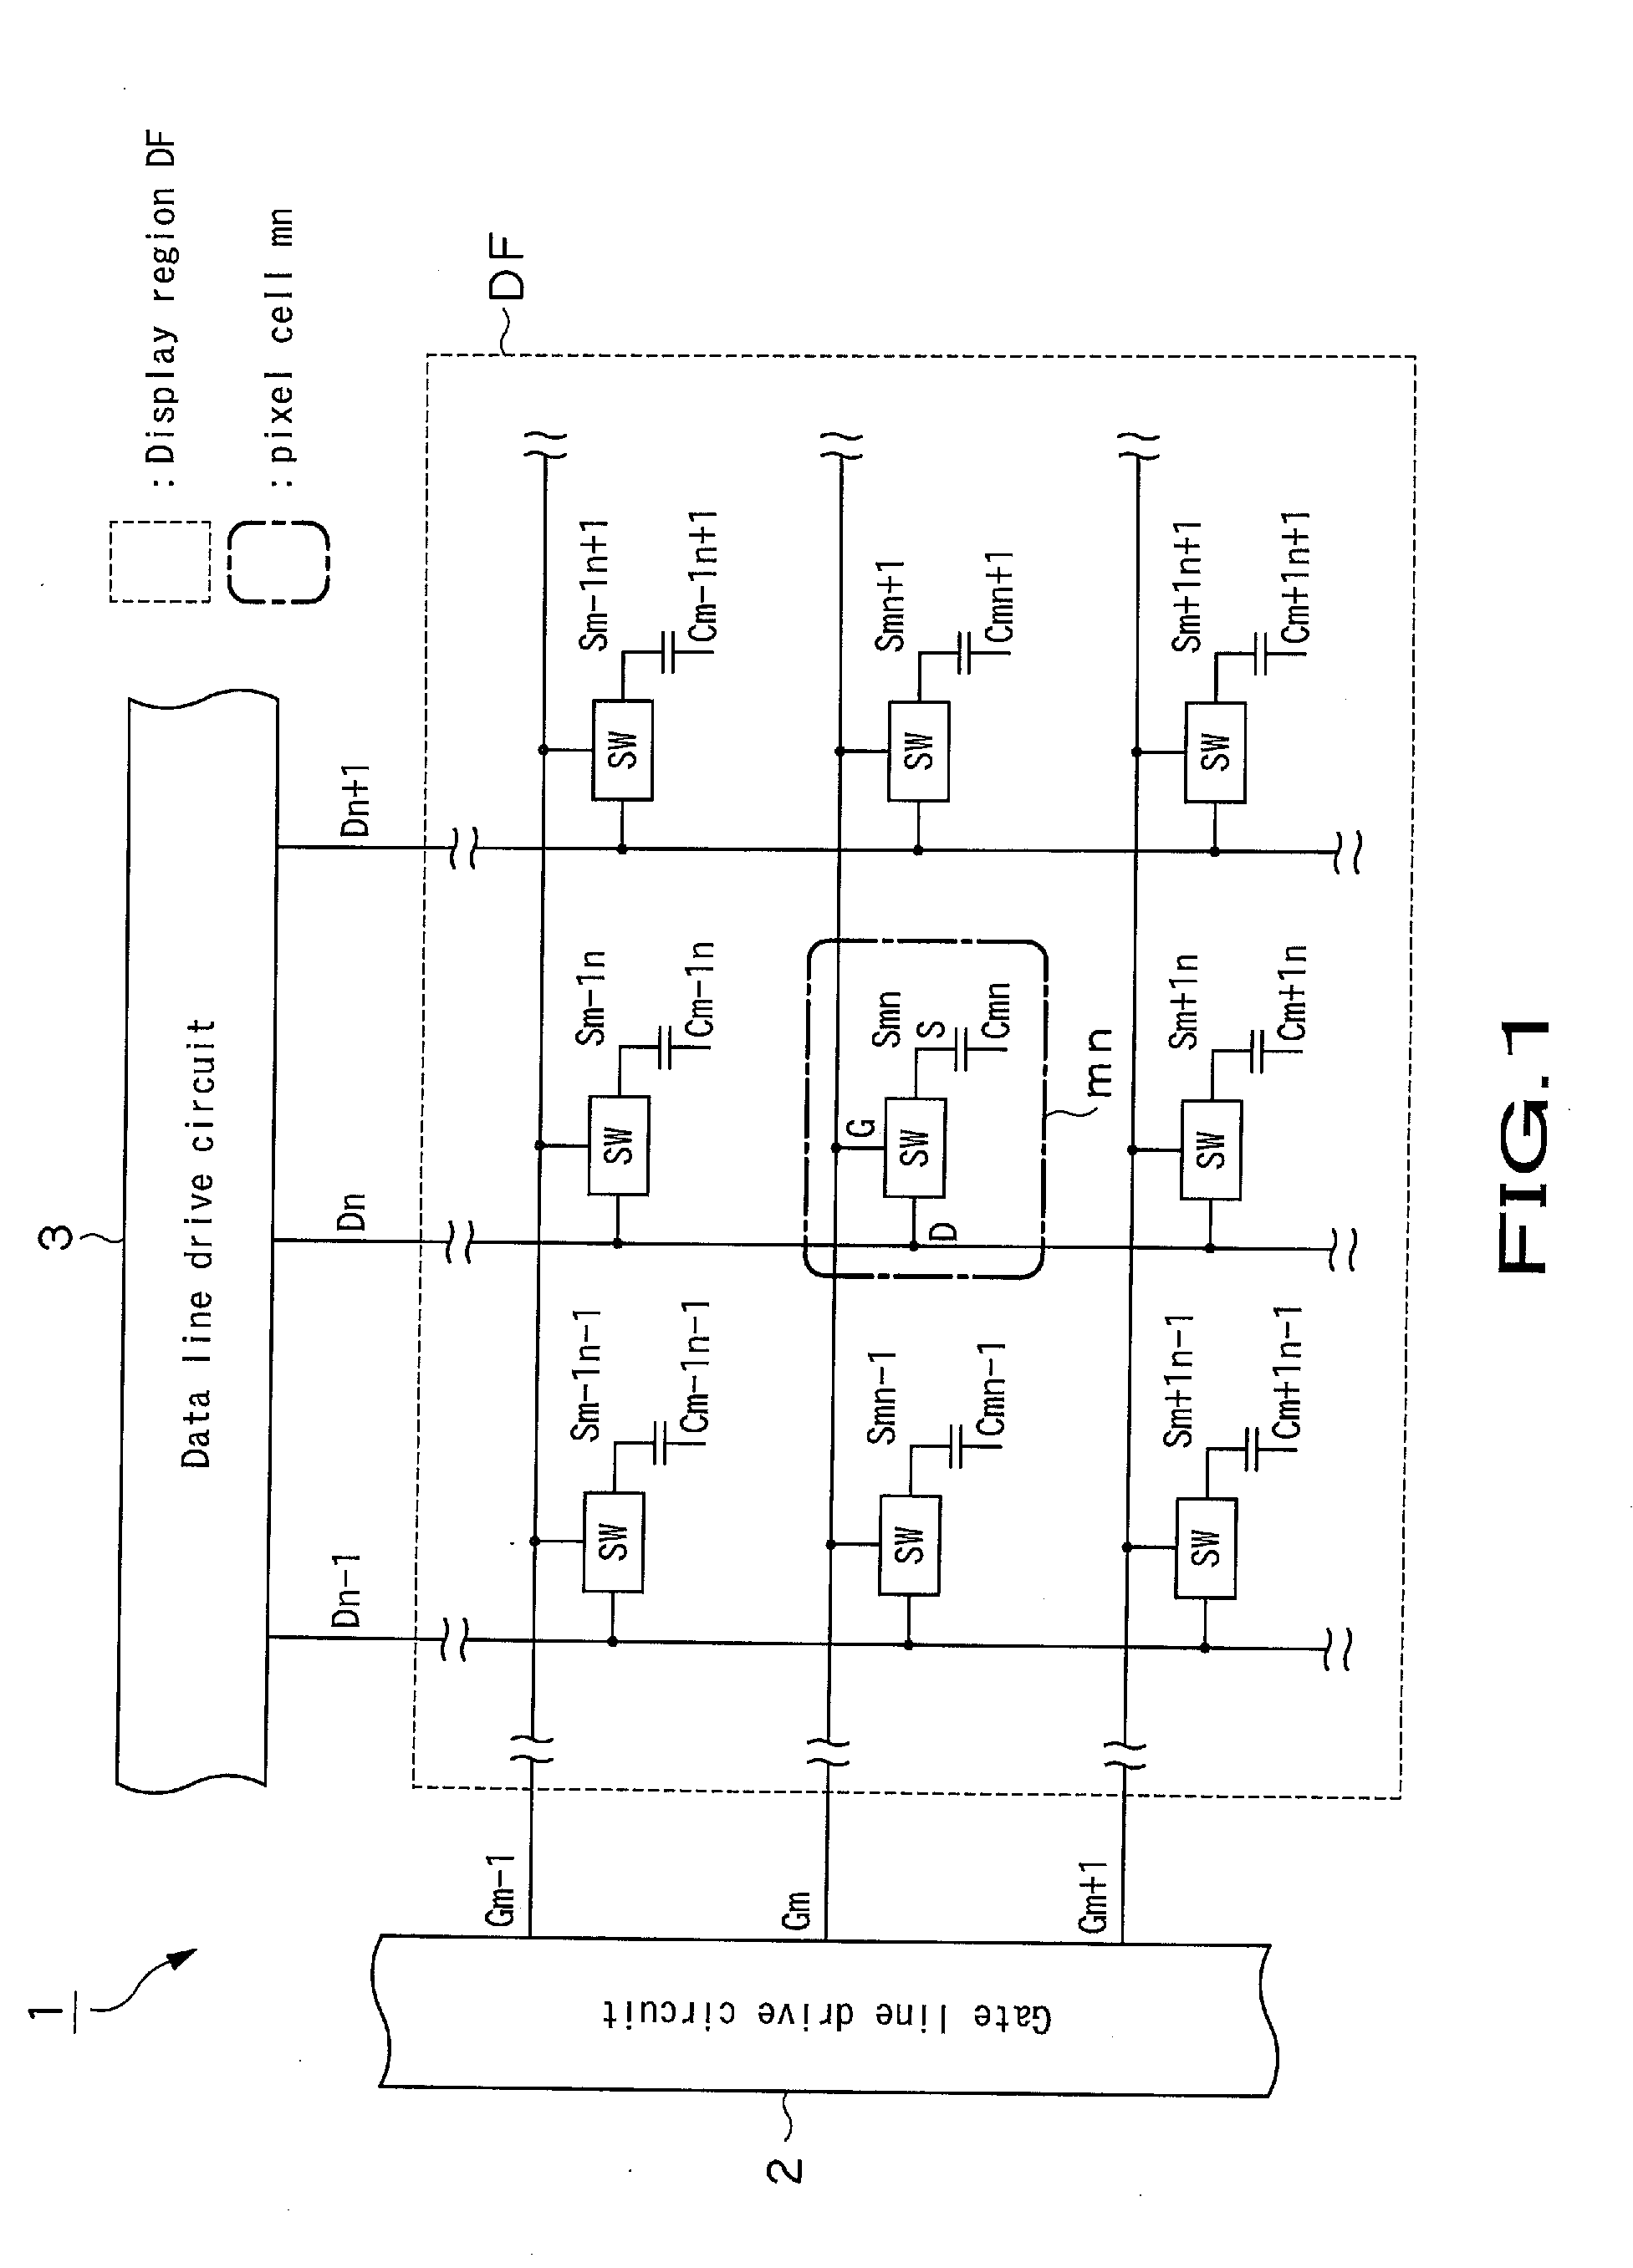 Display apparatus and inspection method